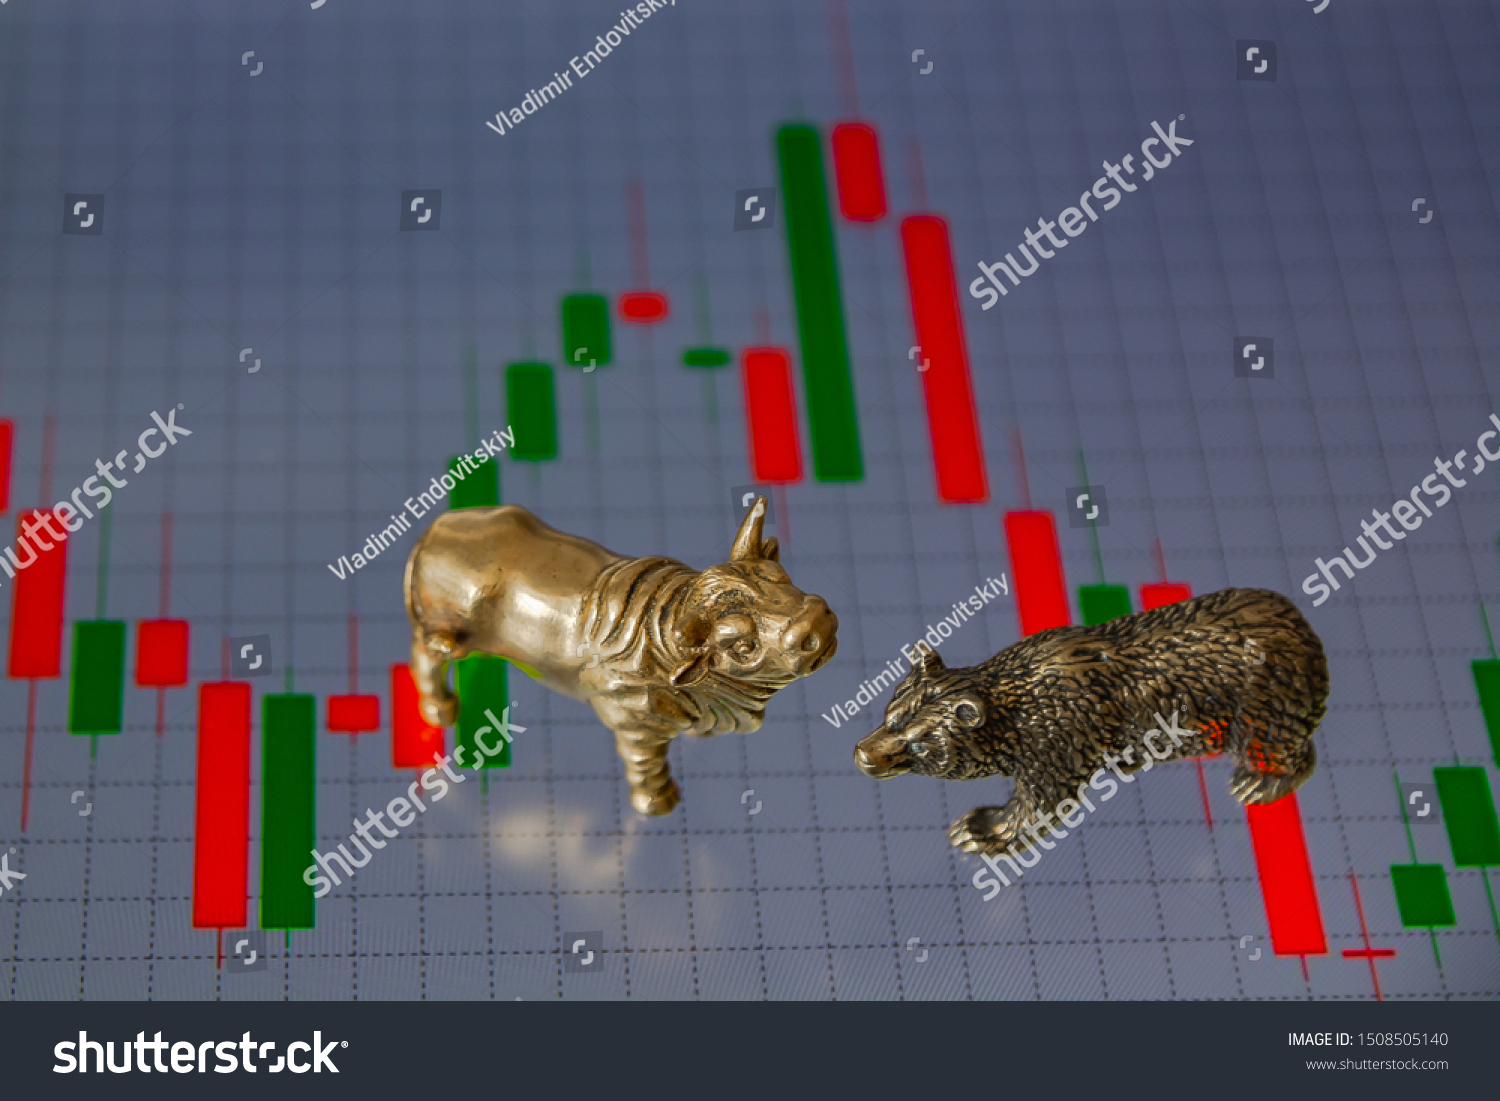 Bull and bear as symbols of stock trading on a blurred background of price graphics. The concept of symbolism of commodity and financial world markets. #1508505140